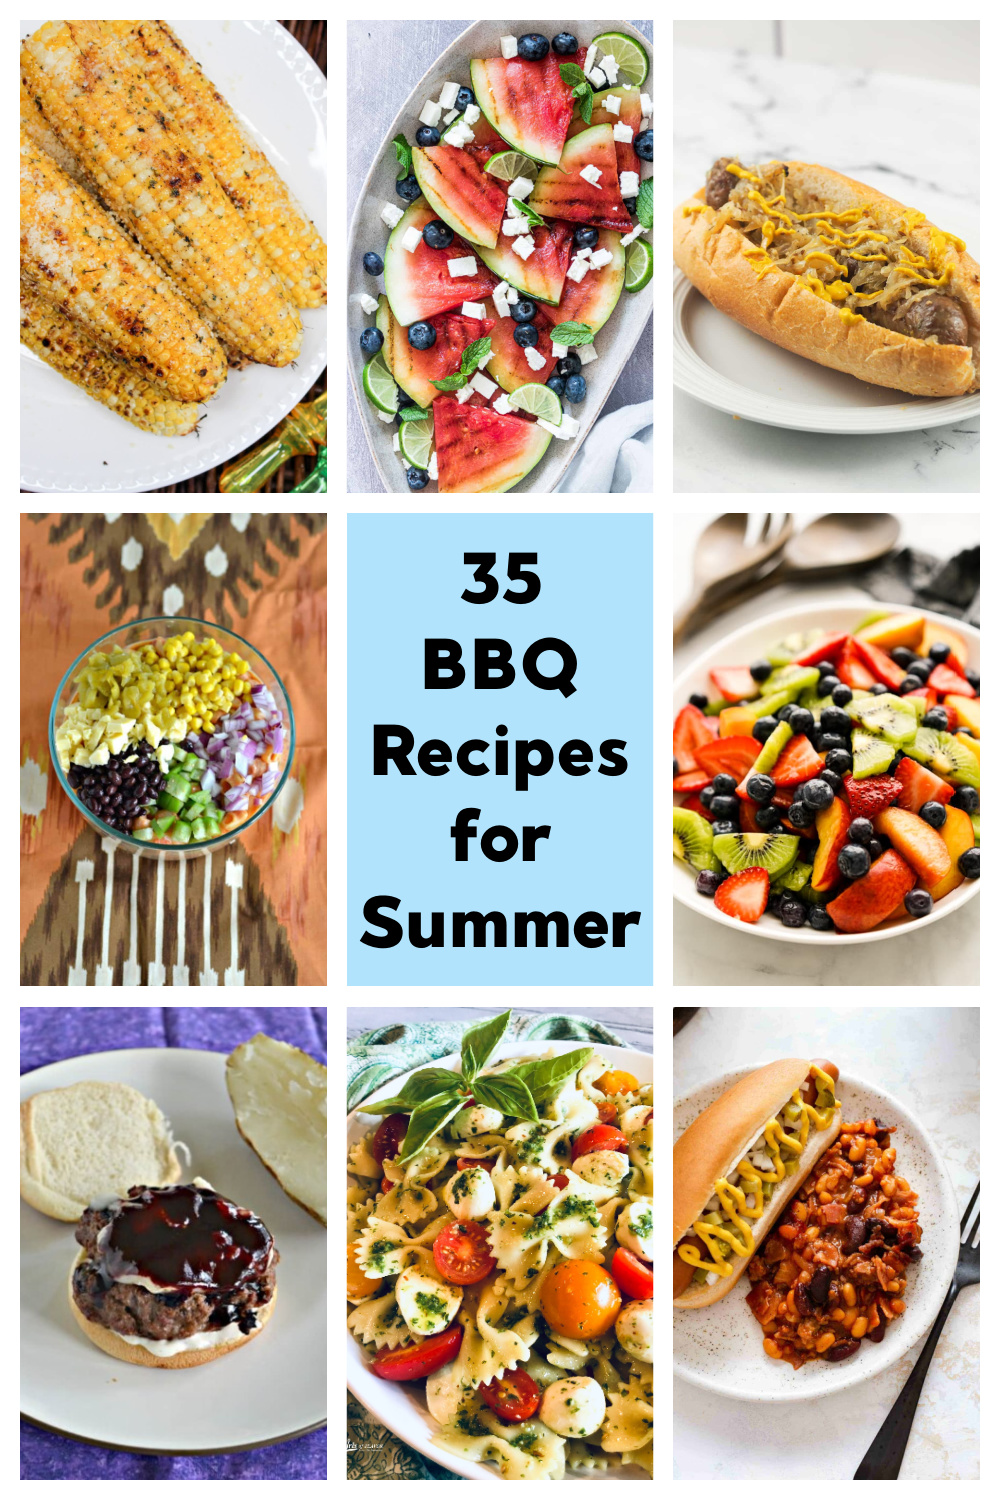 35 BBQ Recipes for Memorial Day and Summer Celebrations!